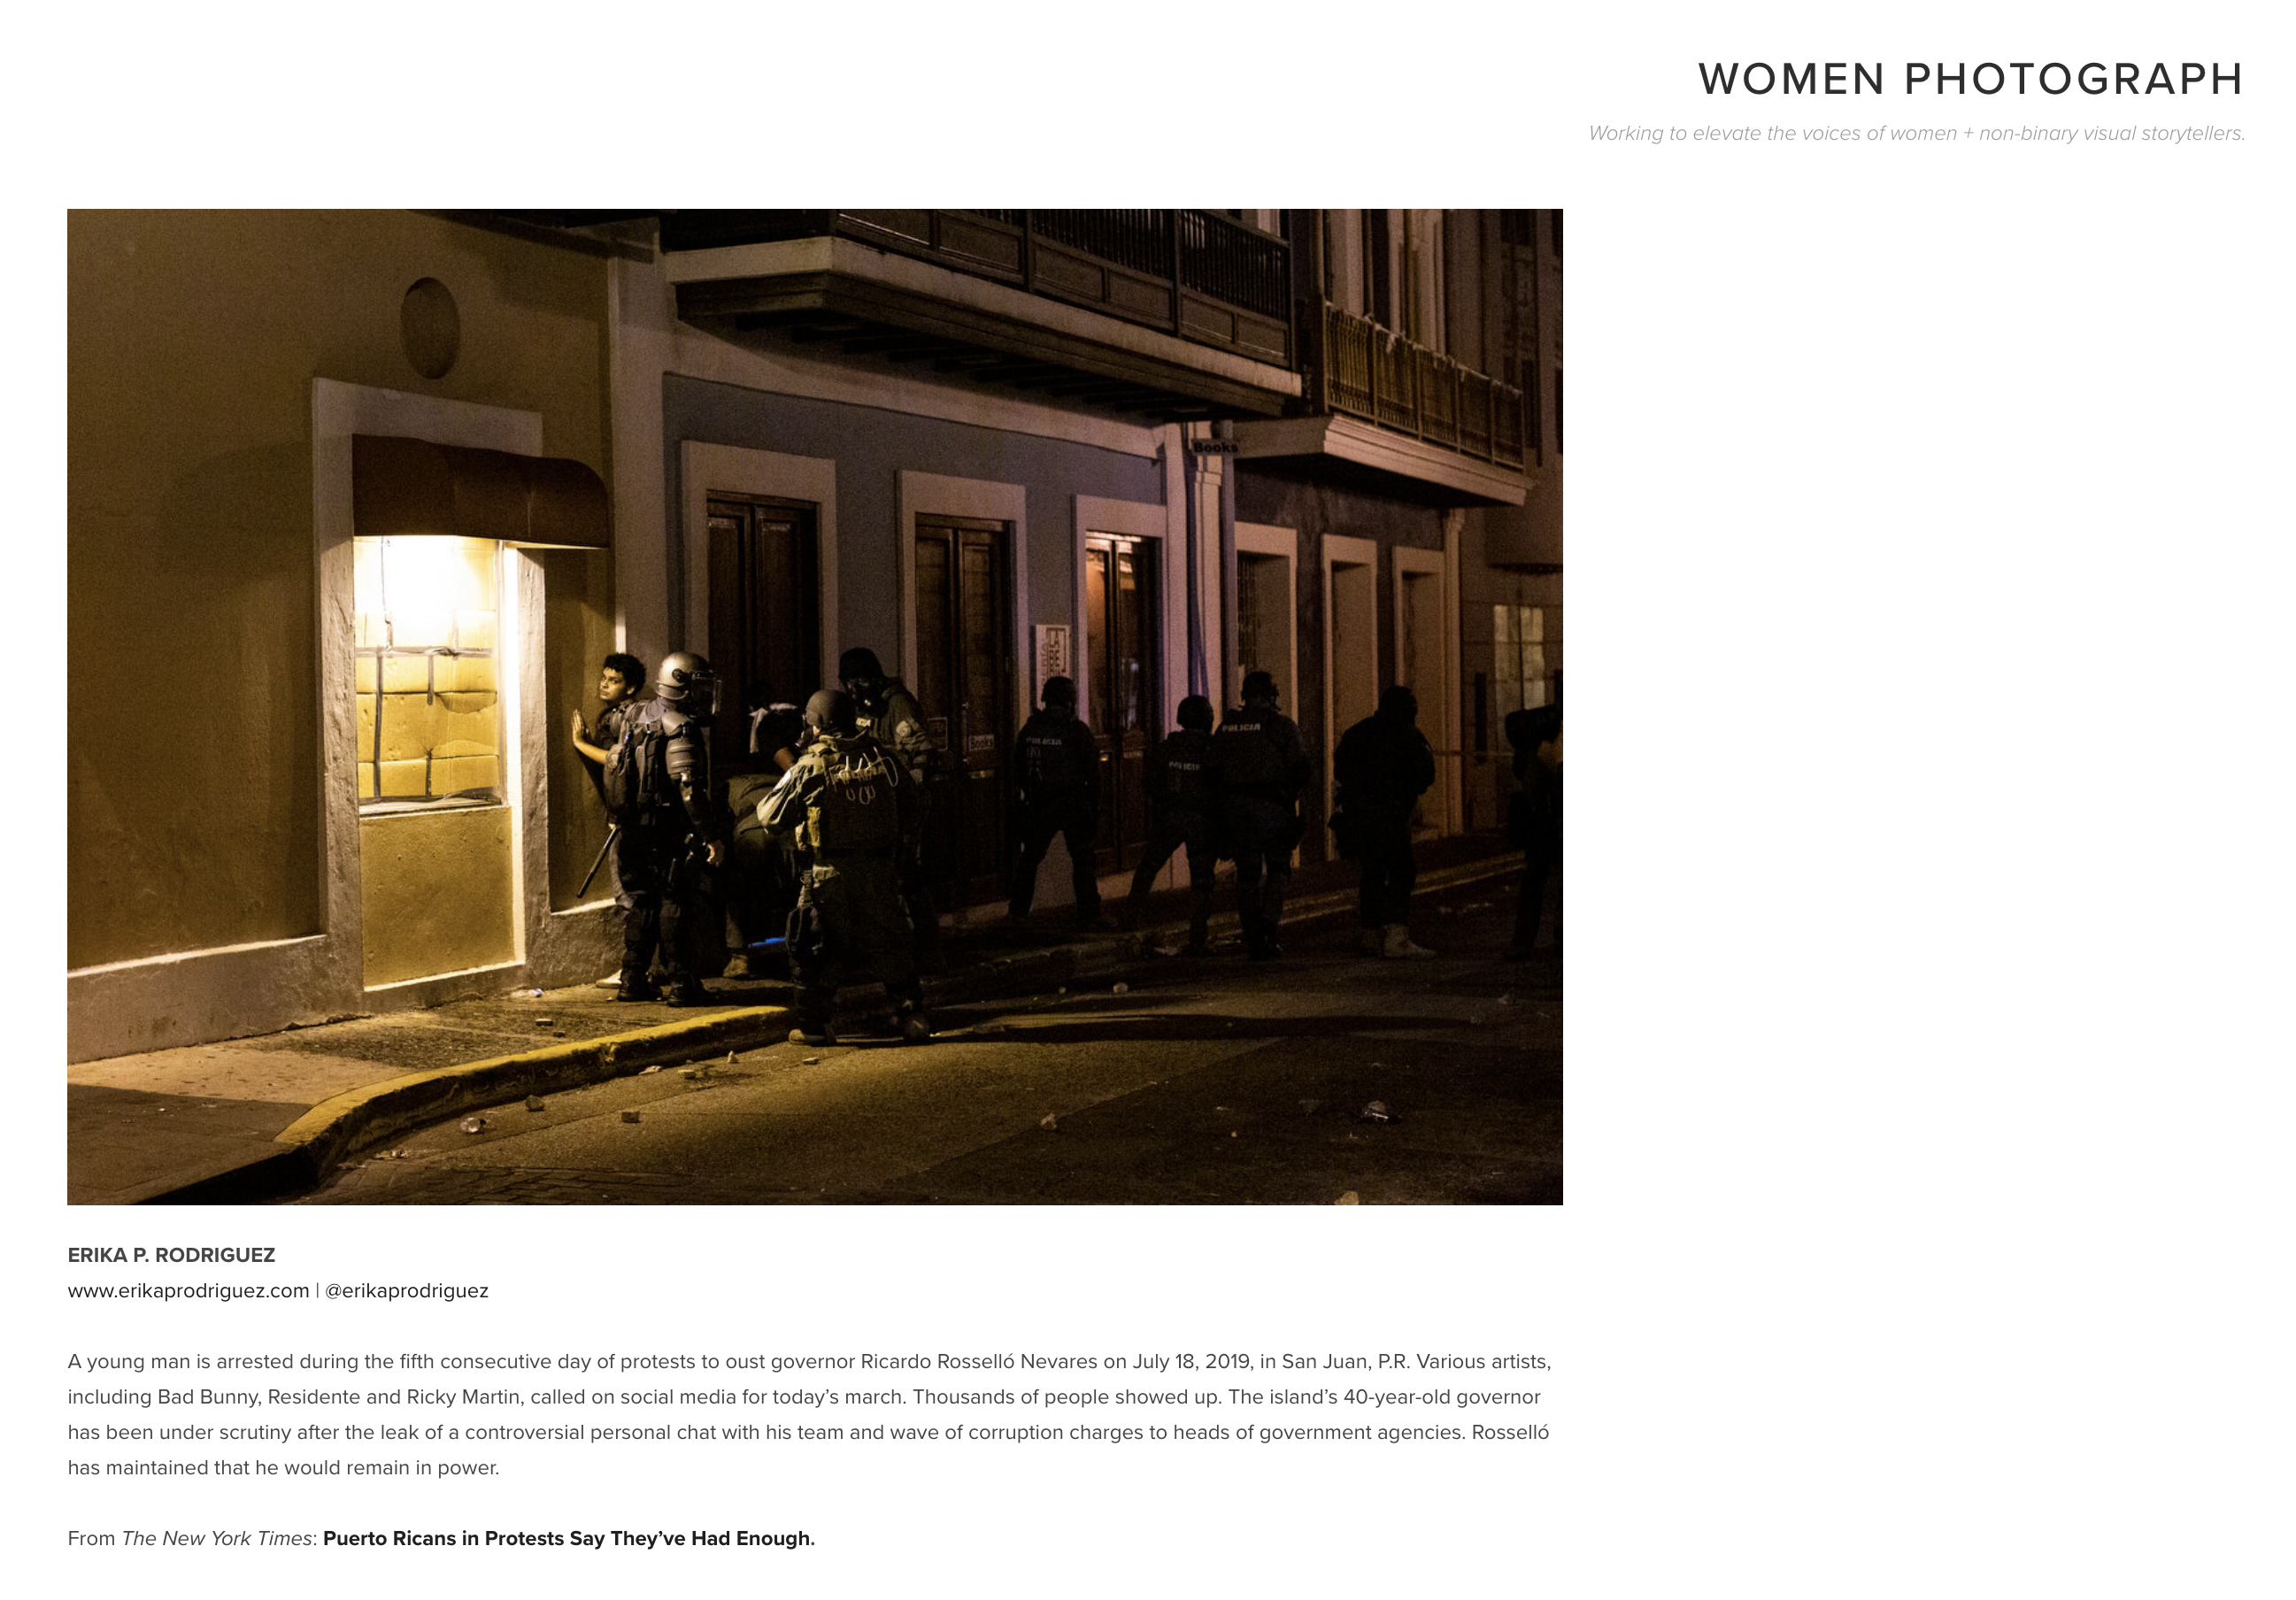 Thumbnail of Women Photograph: 2019 Year In Pictures